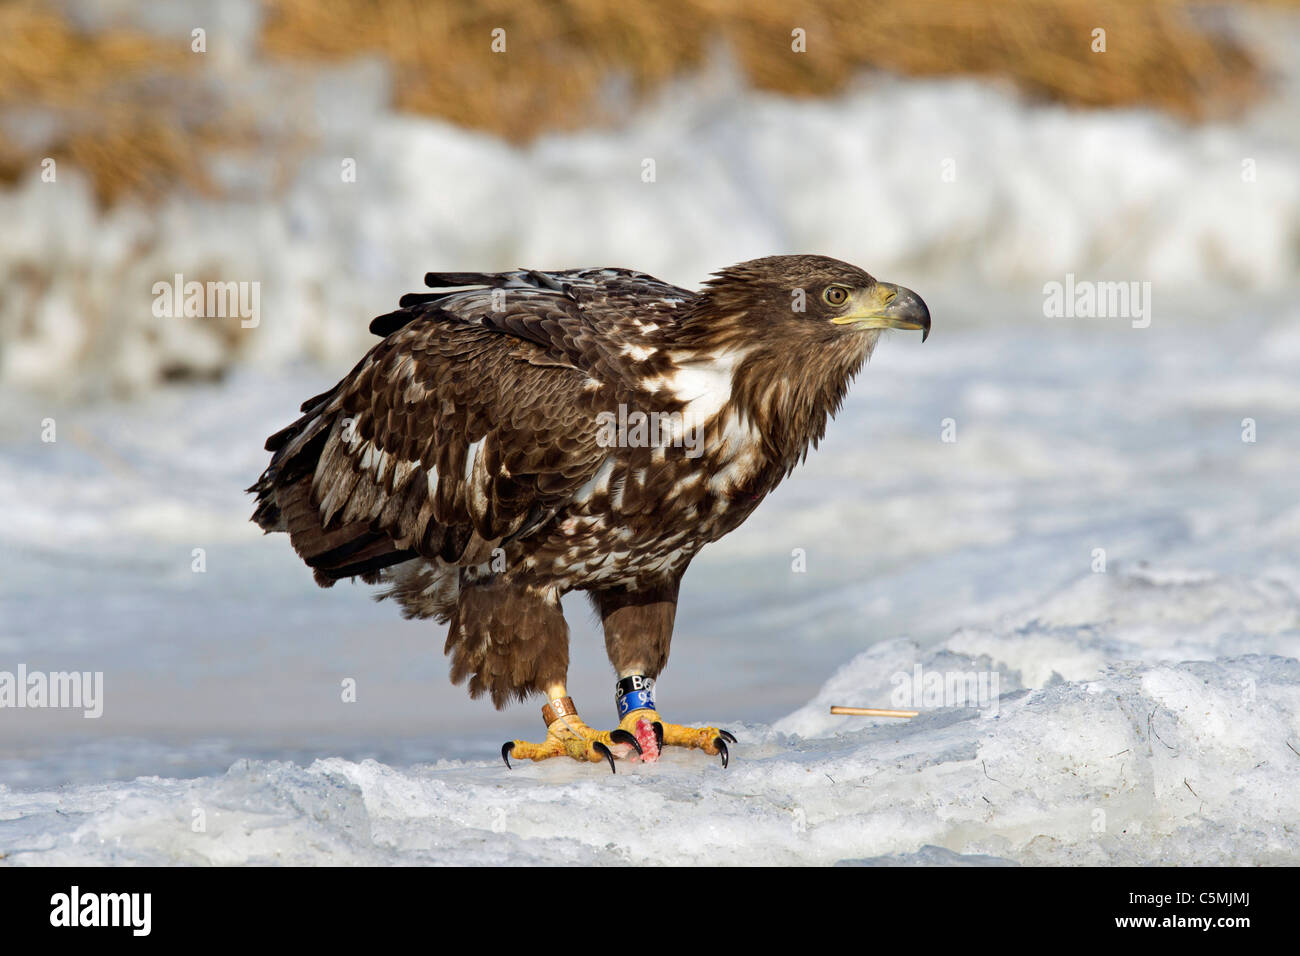 White-Tailed Eagle (Haliaeetus albicilla). Juvenile standing on ice with a piece of fish in its talons. Stock Photo